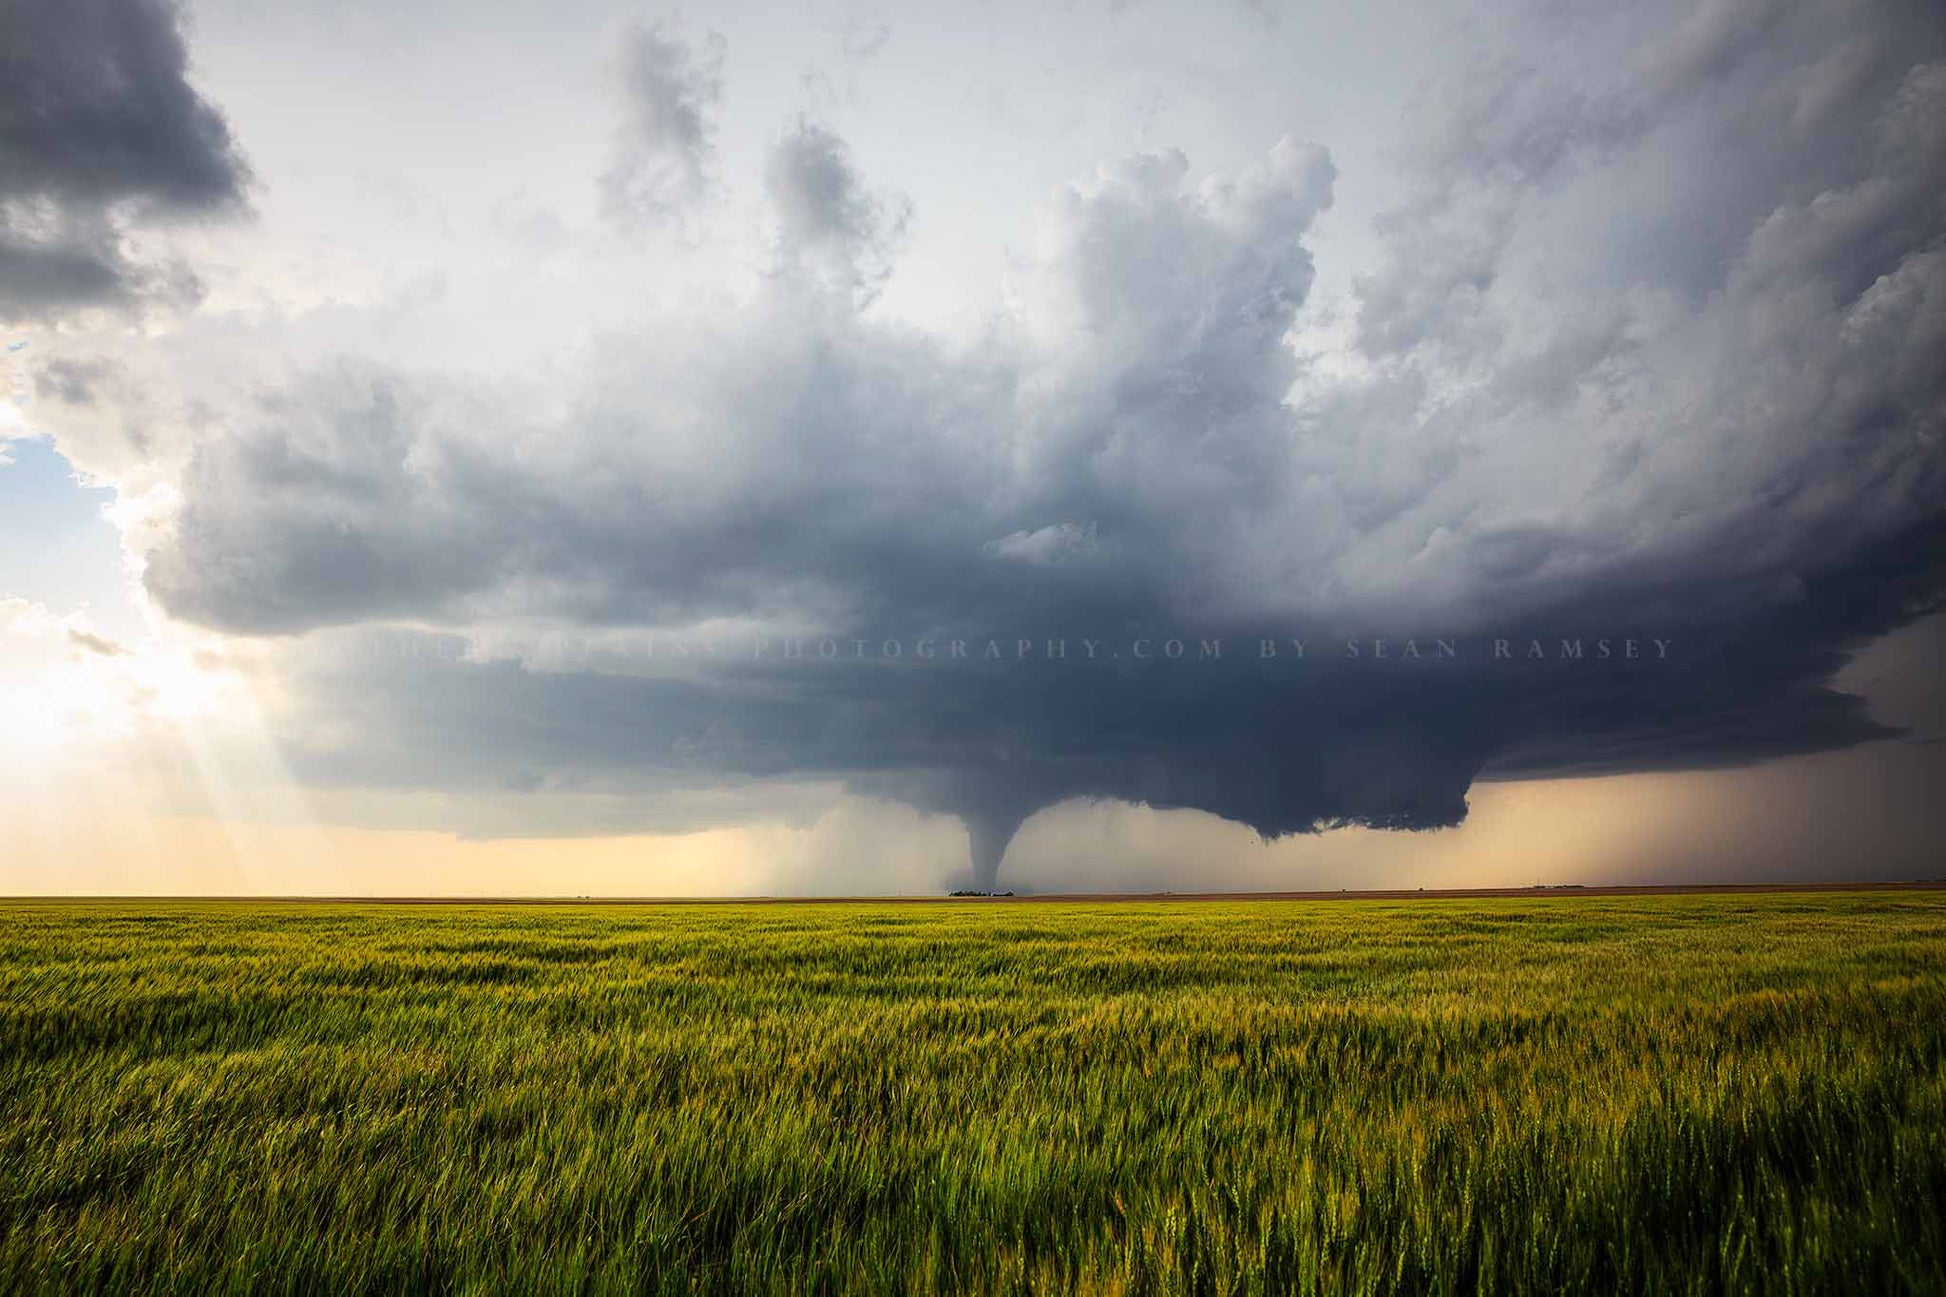 Storm photography print of a distant tornado over a wheat field on a stormy spring day in Kansas by Sean Ramsey of Southern Plains Photography.